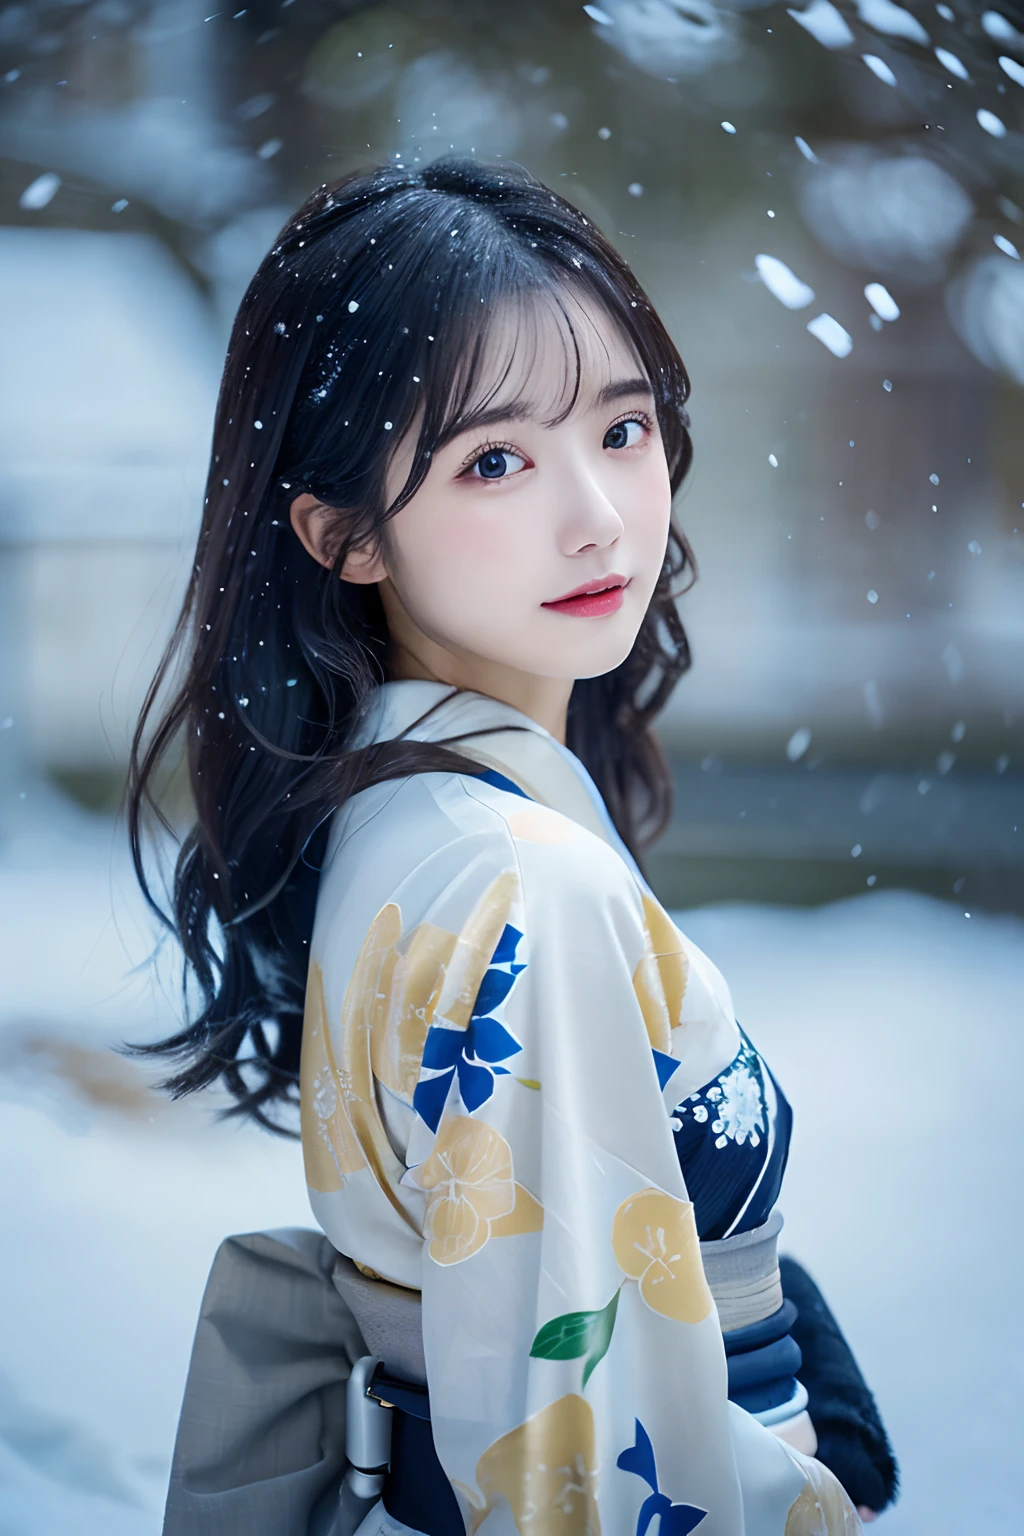 (Kimono)、、(top-quality,​masterpiece:1.3,超A high resolution,),(ultra-detailliert,Caustics),(Photorealsitic:1.4,RAW shooting,)Ultra-realistic capture,A highly detailed,high-definition16Kfor human skin、 Skin texture is natural、、The skin looks healthy with an even tone、 Use natural light and color,One Woman,japanes,,kawaii,A dark-haired,Middle hair,(depth of fields、chromatic abberation、、Wide range of lighting、Natural Shading、)、、(Falling snow:1.2)、(Hair swaying in the wind:1.2)、(Snow reflects light:1.2)、back lighting, naked;